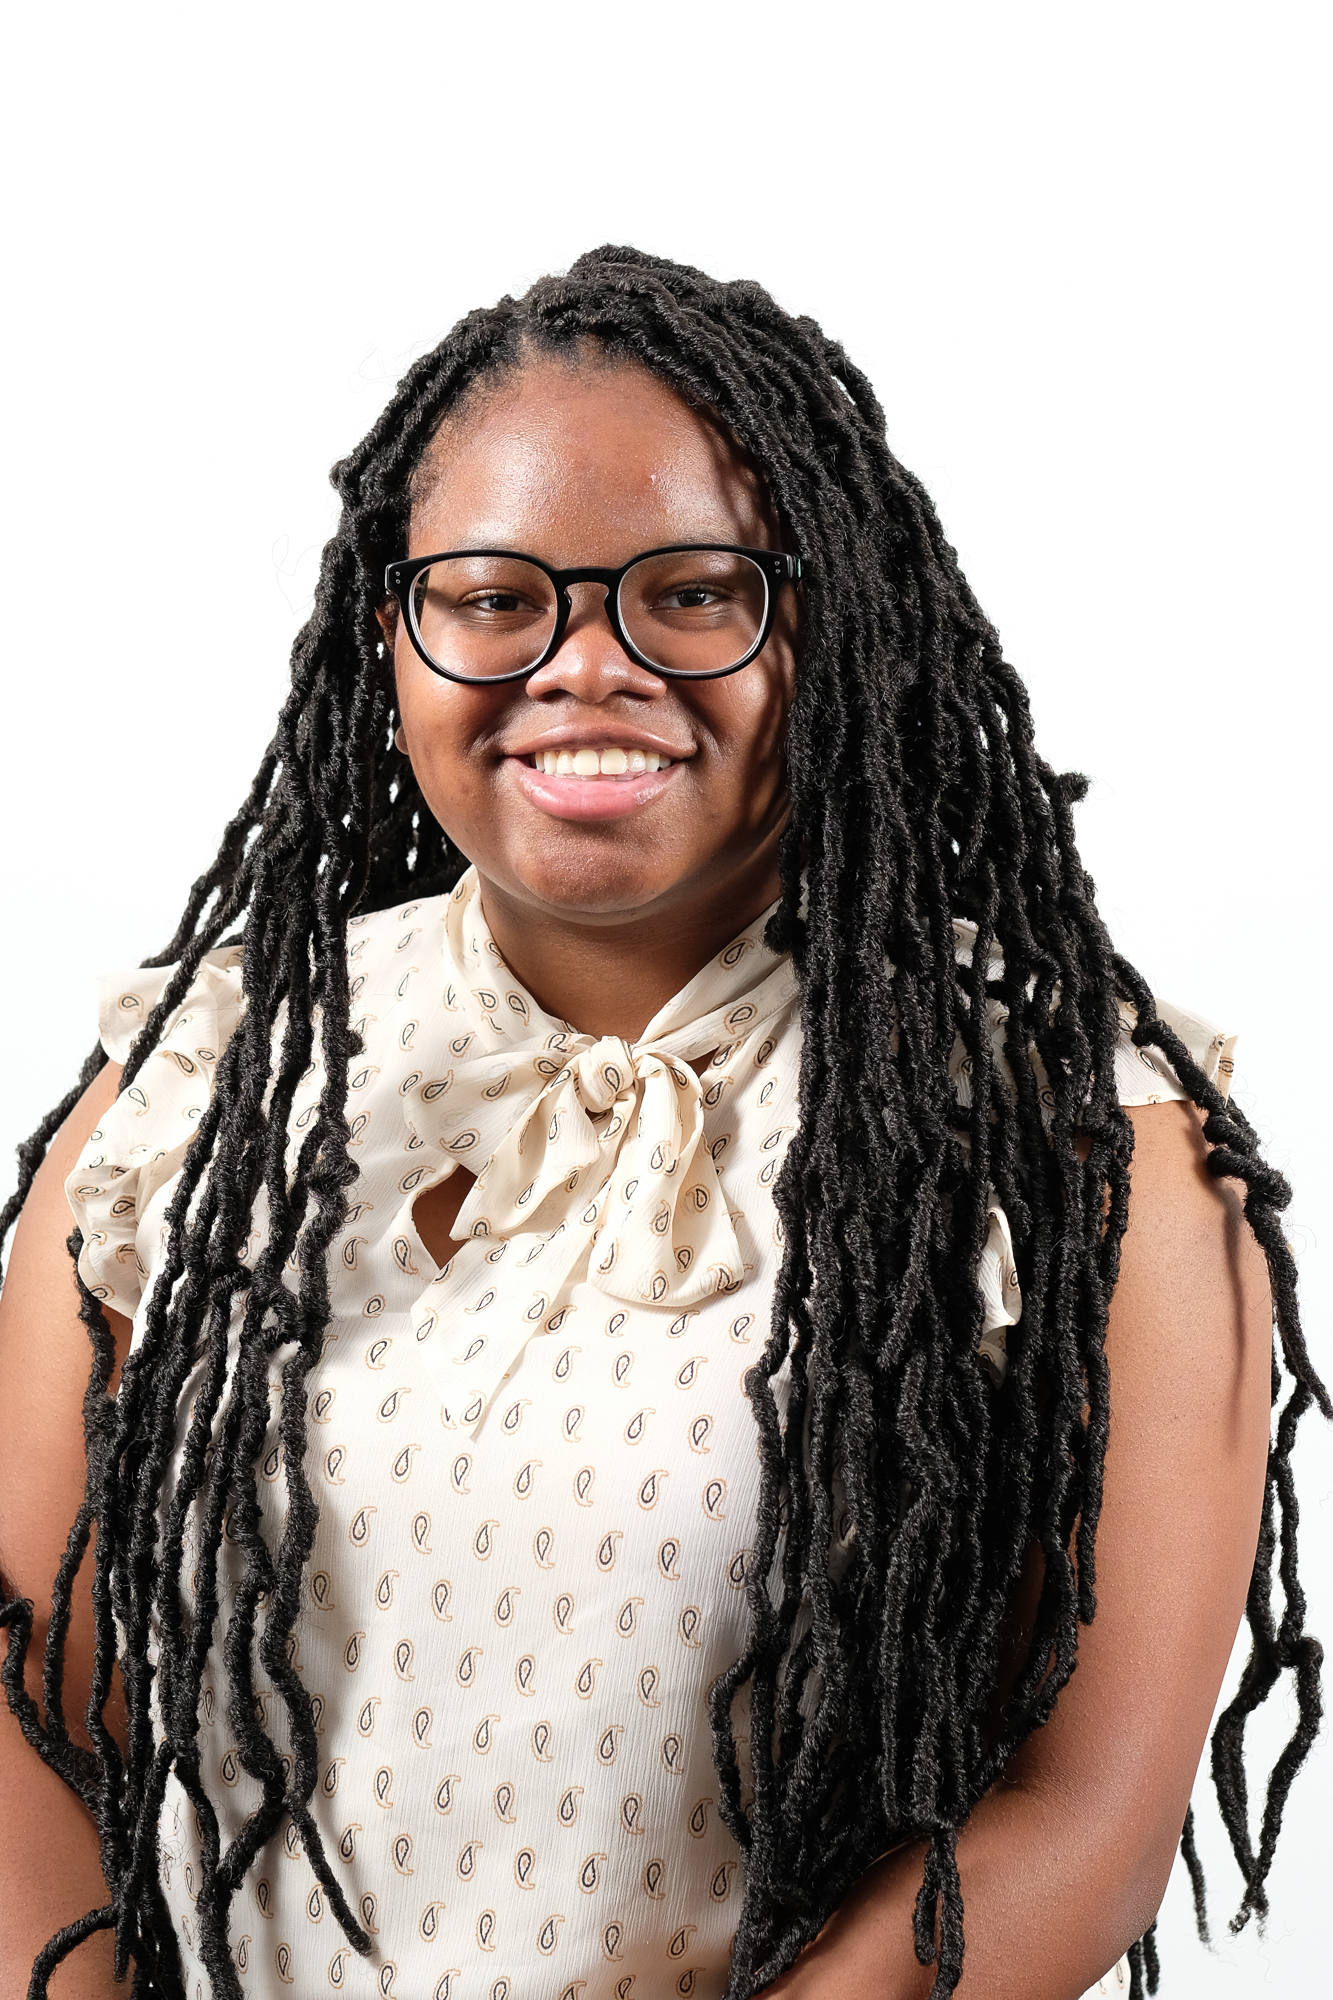 Headshot of Christina Stafford, a black girl, from shoulders up, with her hair in locs. She is wearing glasses and a white patterned top.